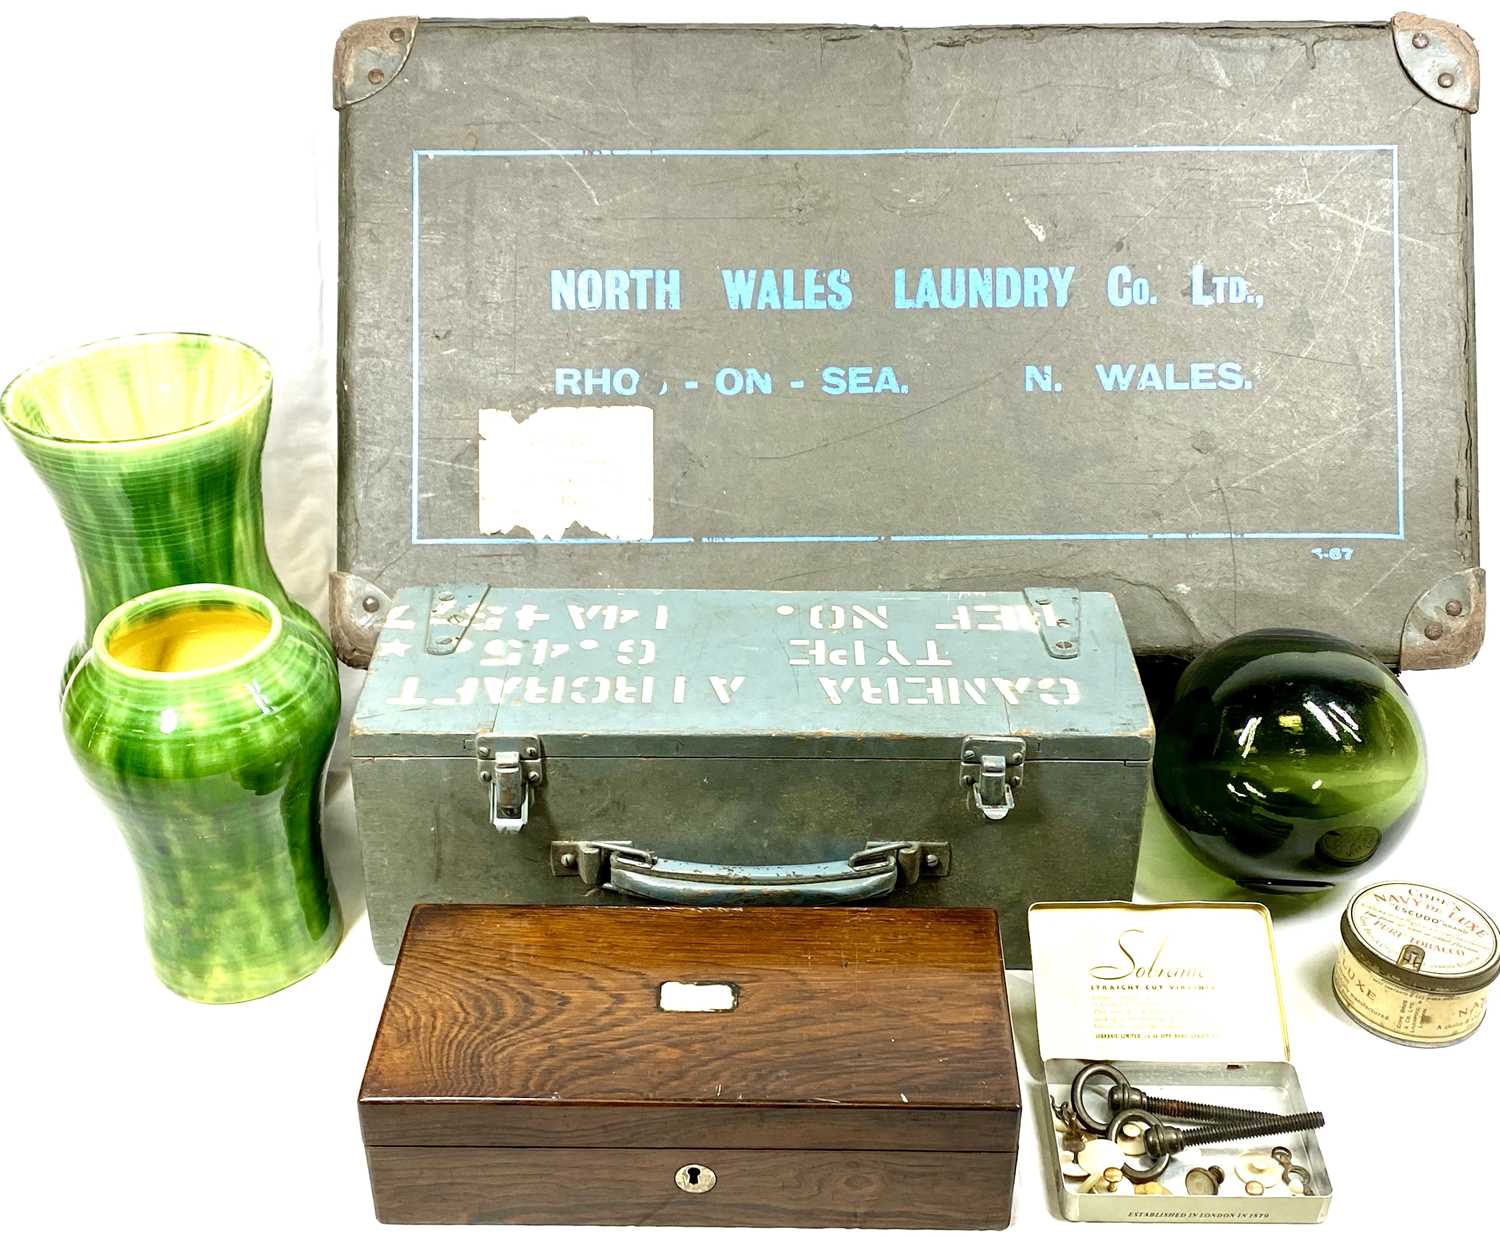 MIXED COLLECTABLES GROUP - contained in a North Wales Laundry Company Limited vintage box, items